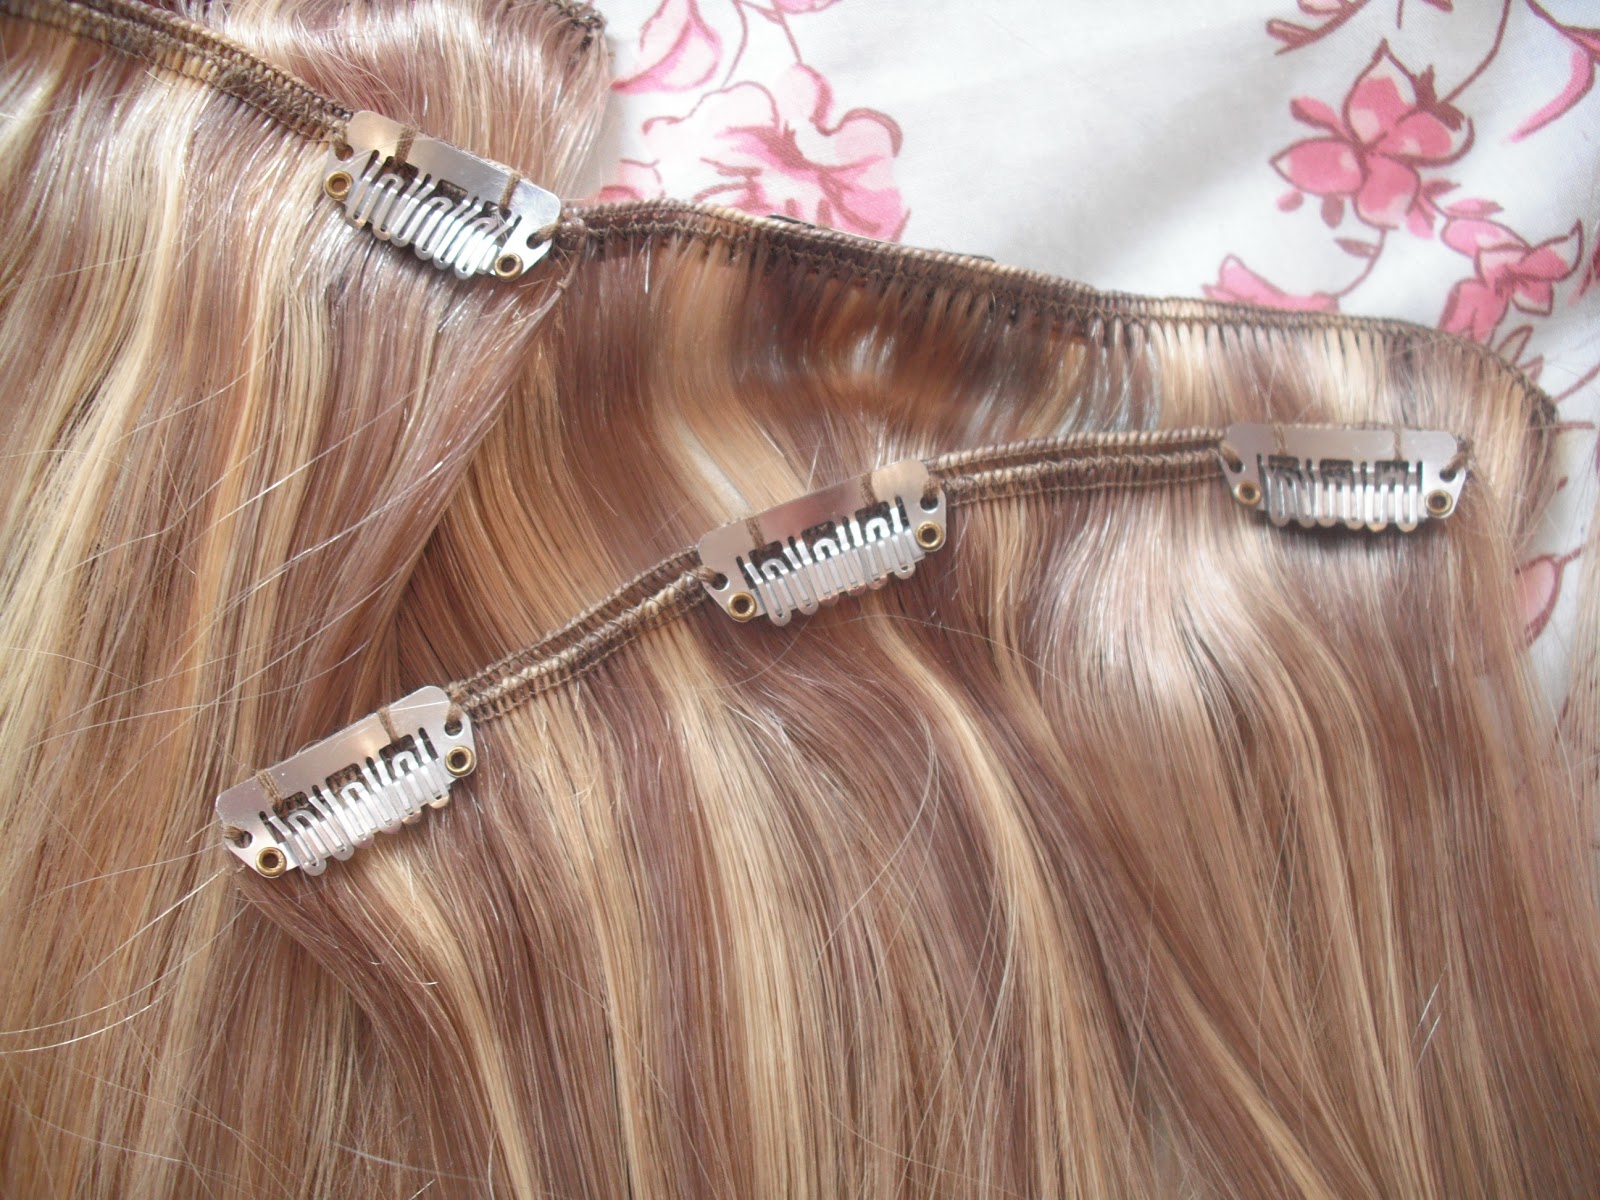 Clip on light blue hair extensions - wide 2